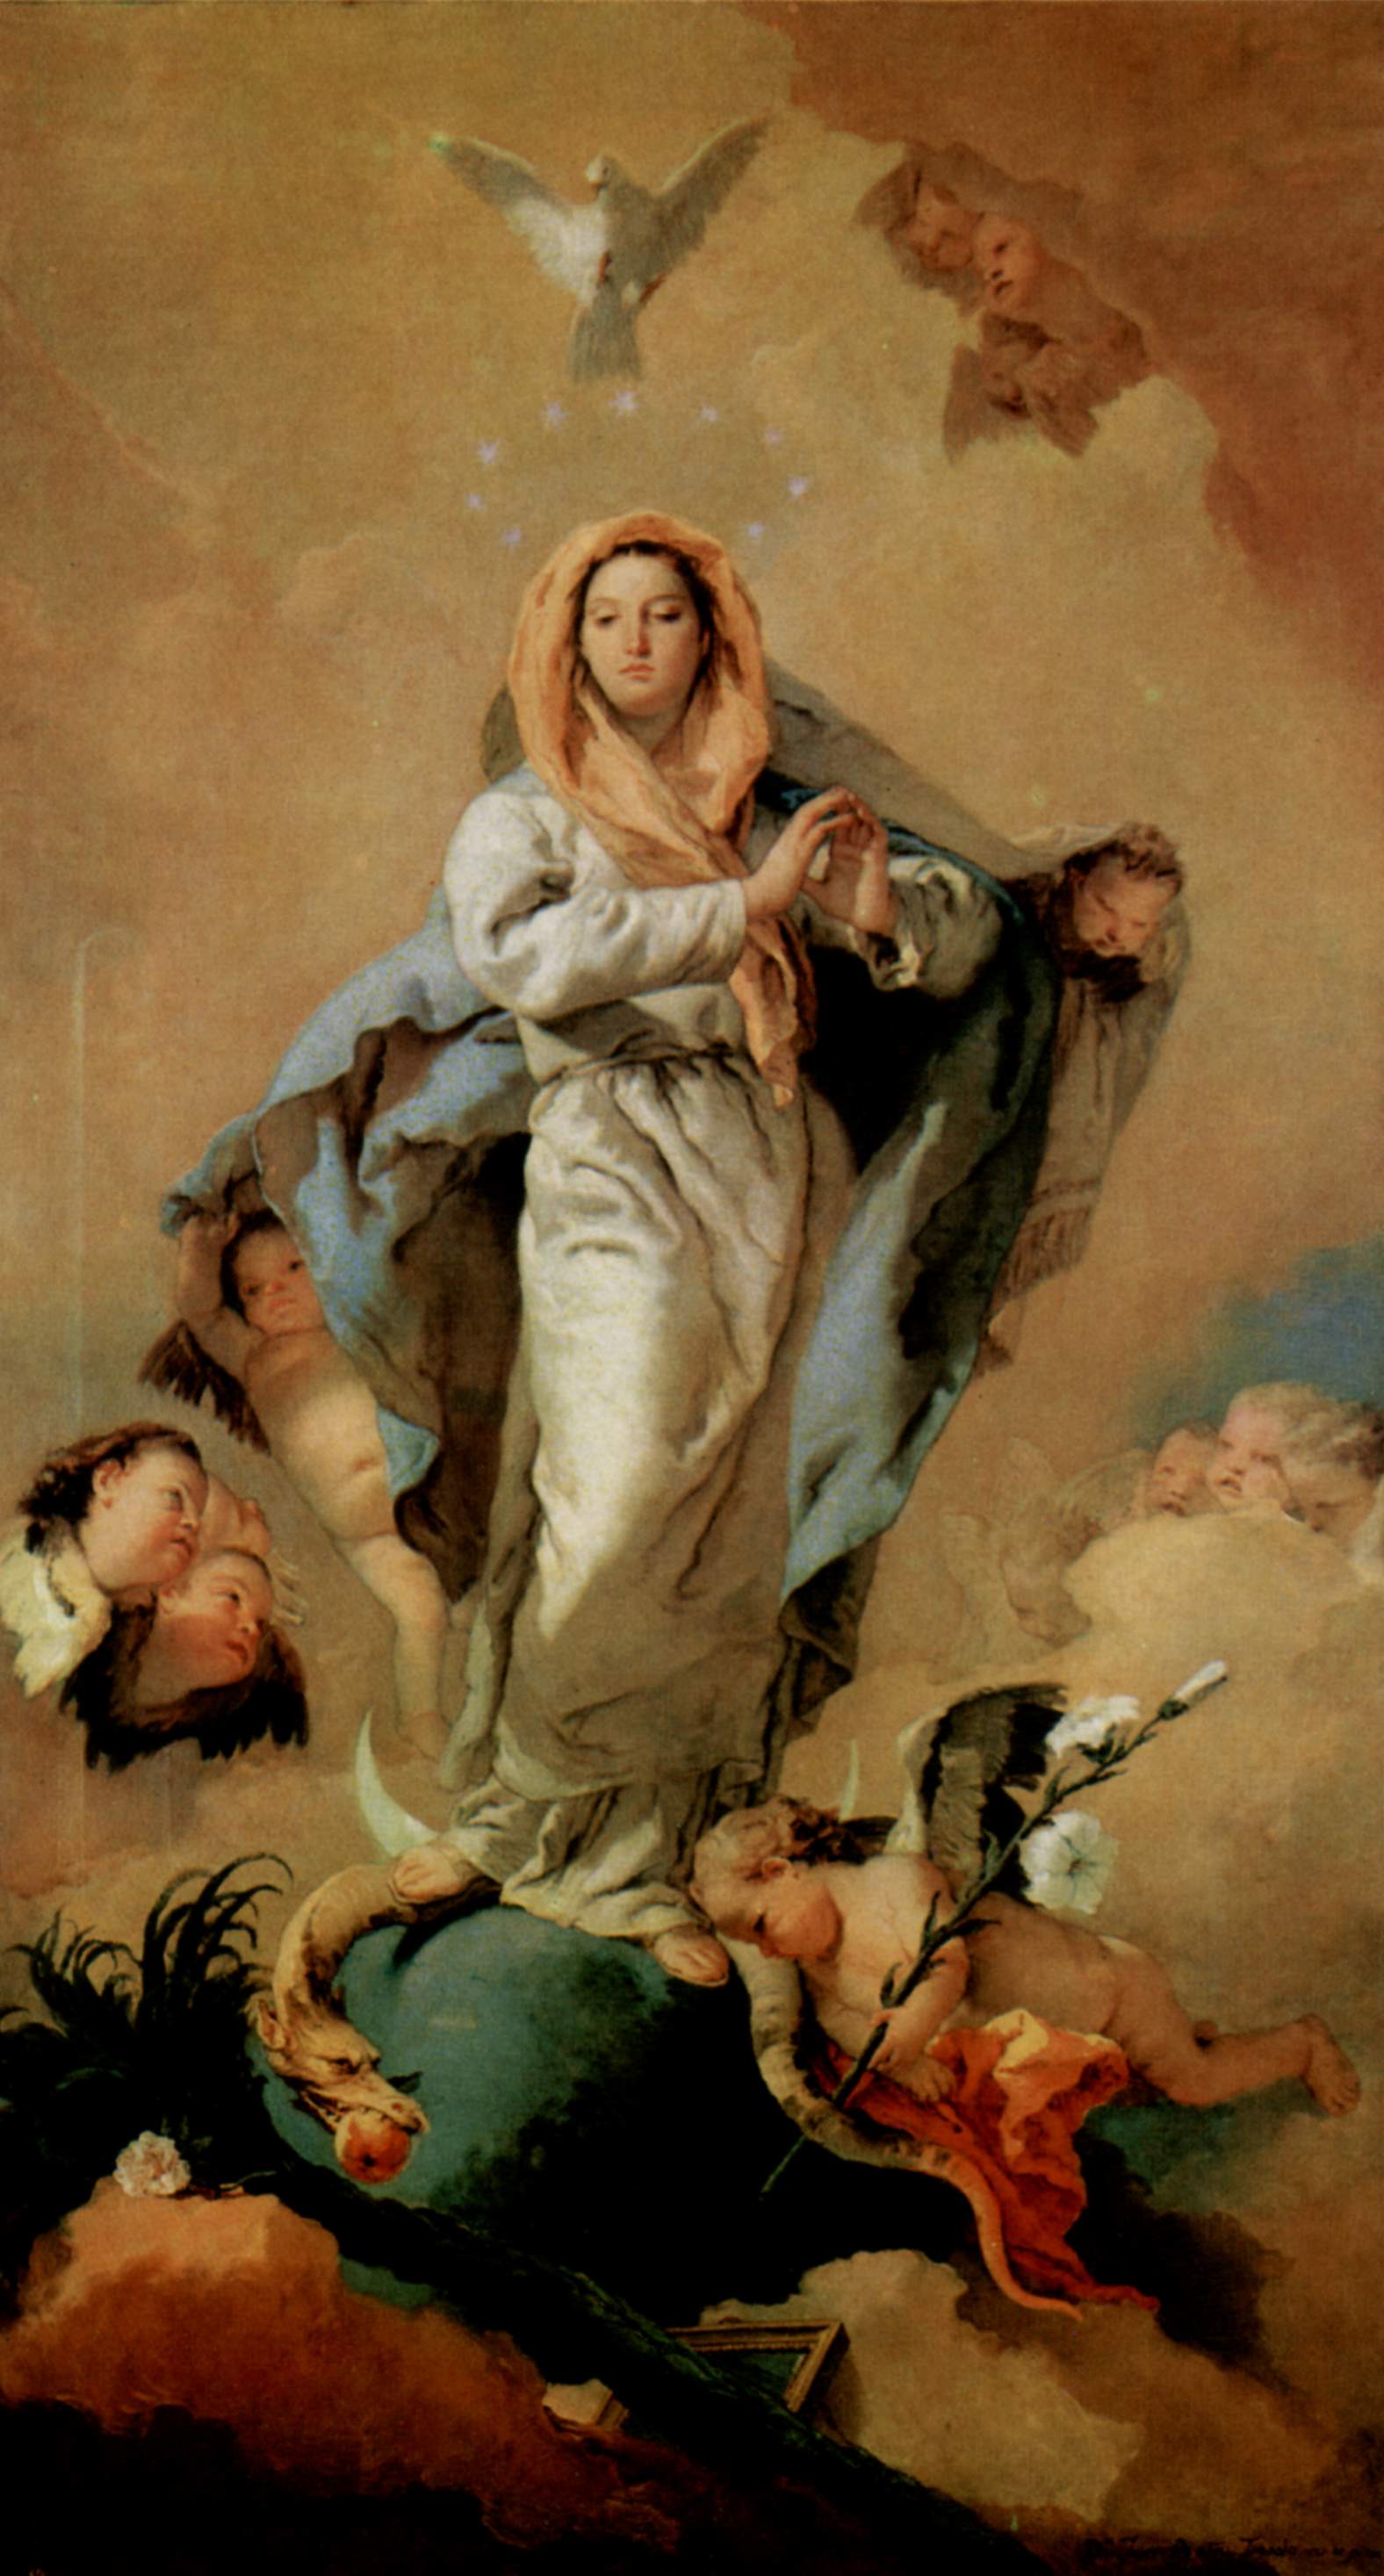 what made this representation of the virgin mary revolutionary